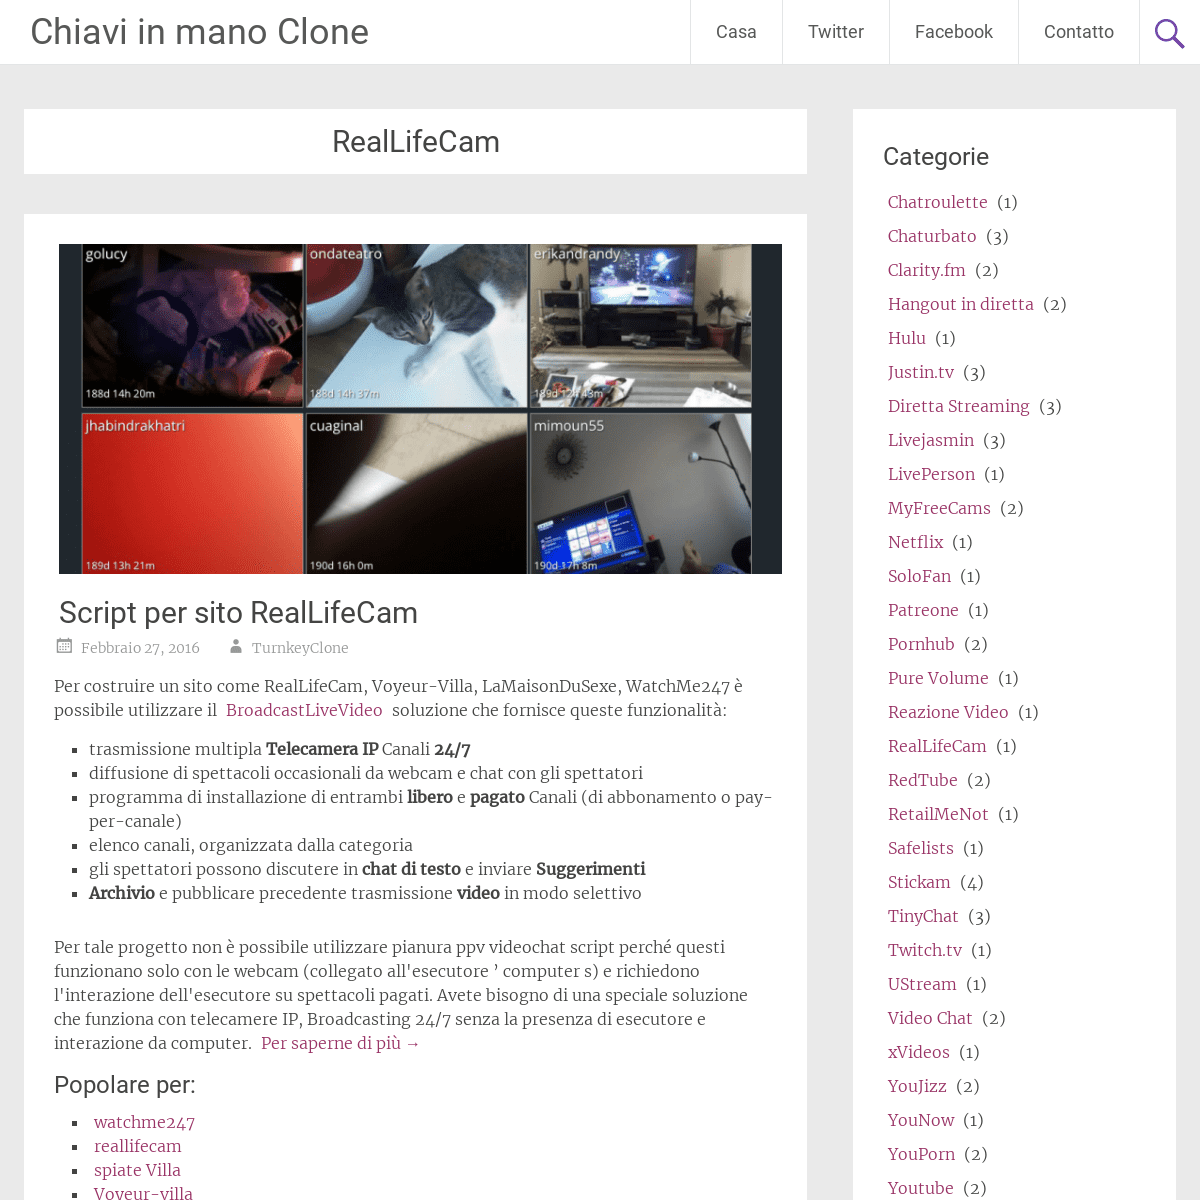 A complete backup of https://turnkeyclone.com/it/category/reallifecam/